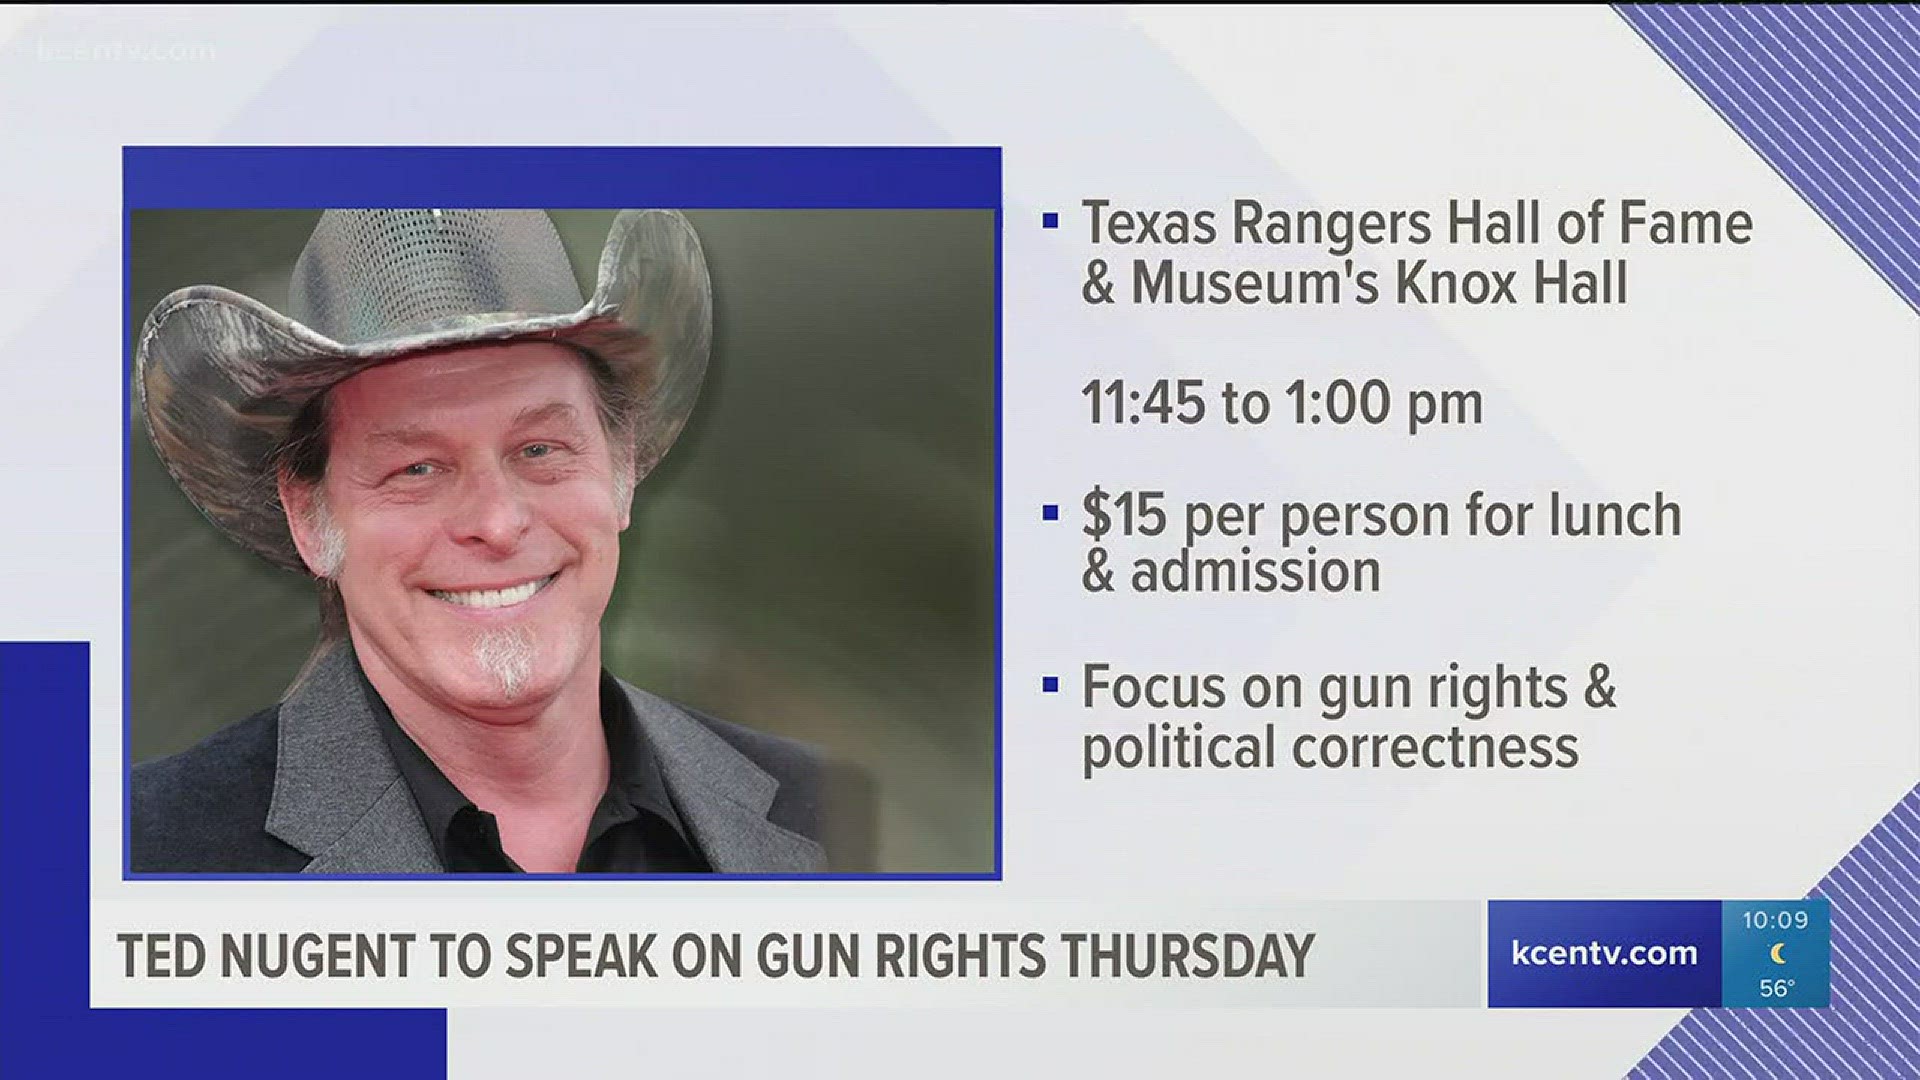 Rock singer and activist Ted Nugent will be speaking in Waco about gun rights protections and political correctness.